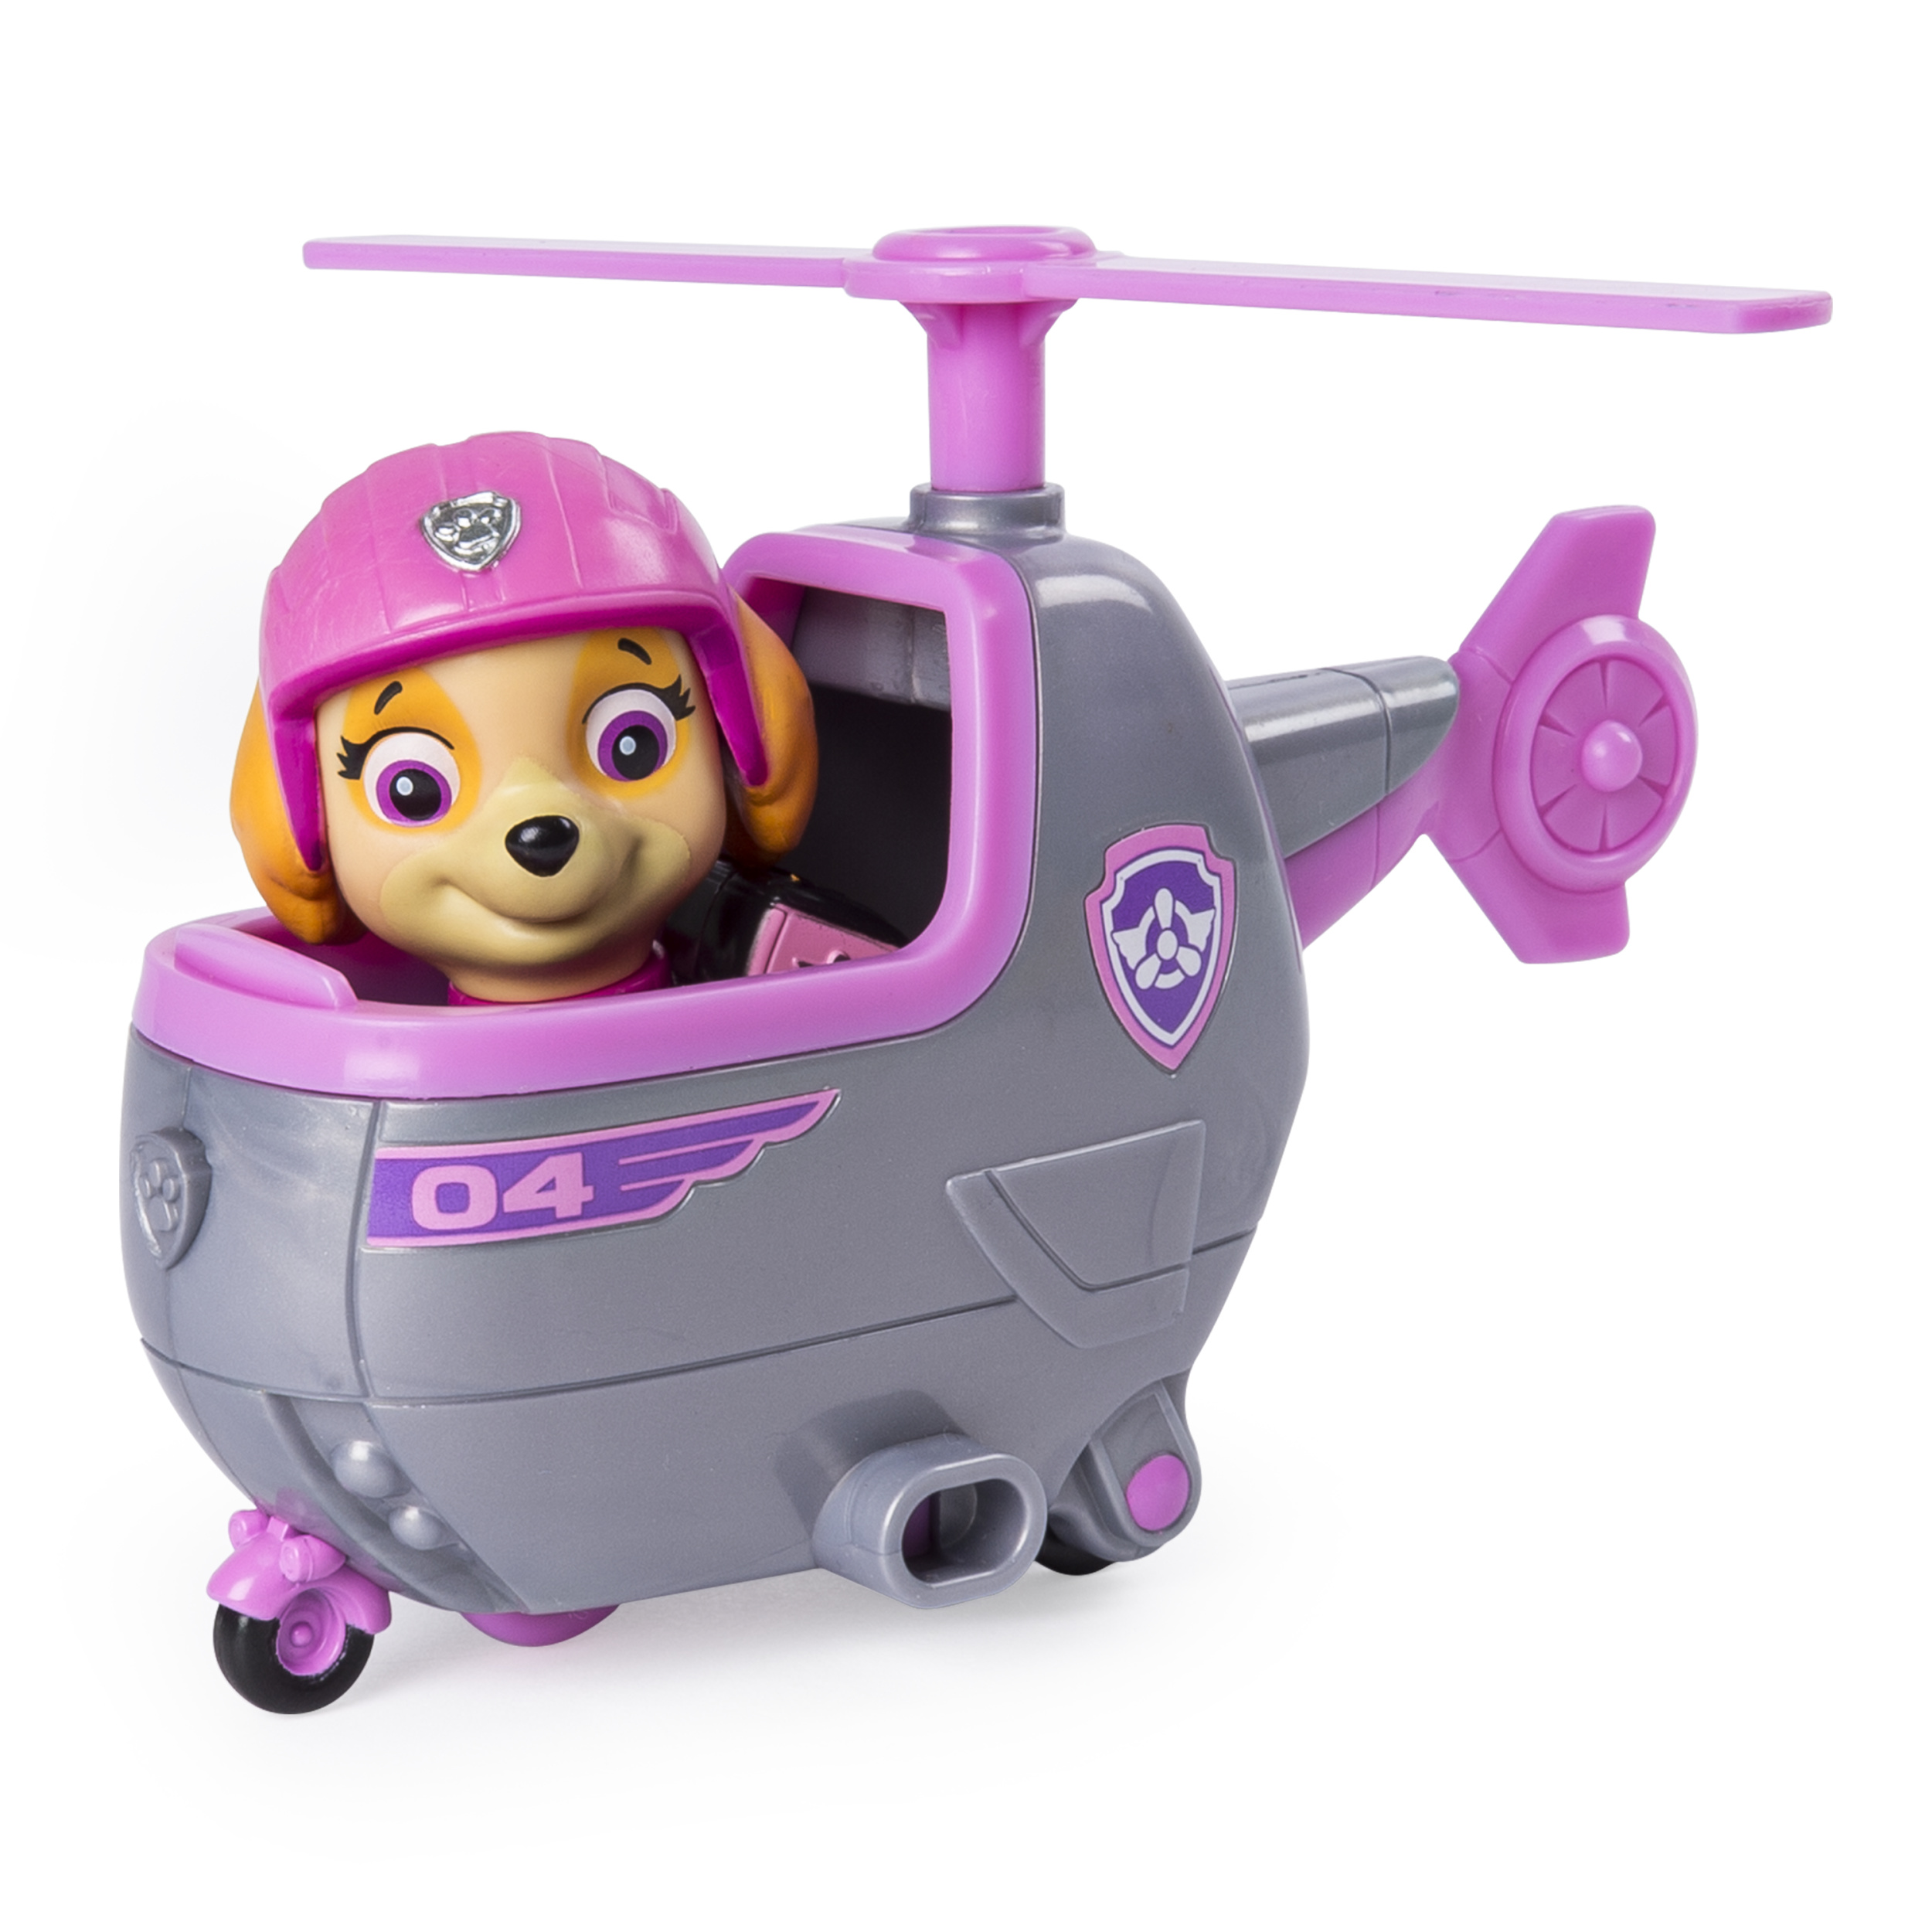 PAW Patrol Ultimate Rescue, Skye’s Mini Helicopter with Collectible Figure, for Ages 3 and Up - image 3 of 6